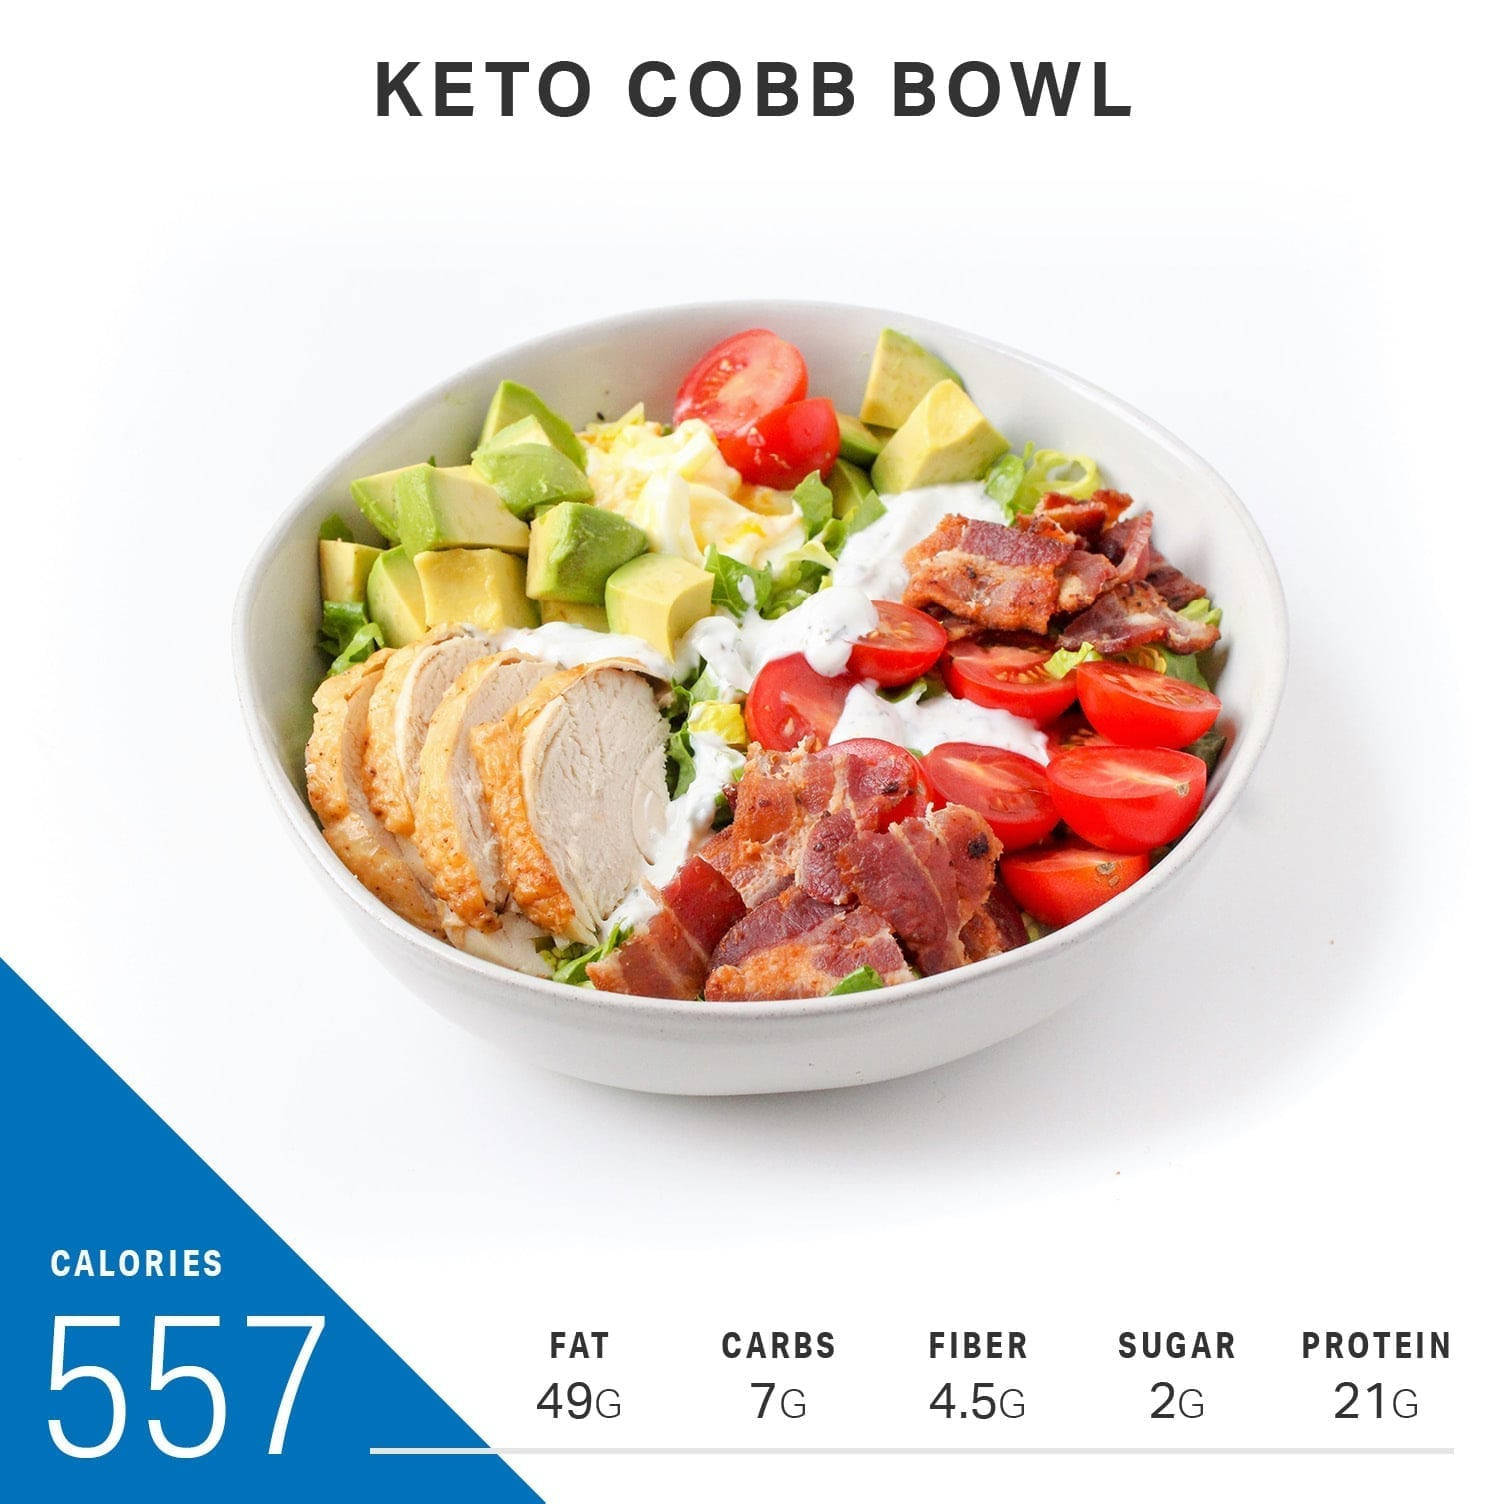 Keto Diet Calories
 What 2 000 Calories Looks Like in a Day Keto Edition